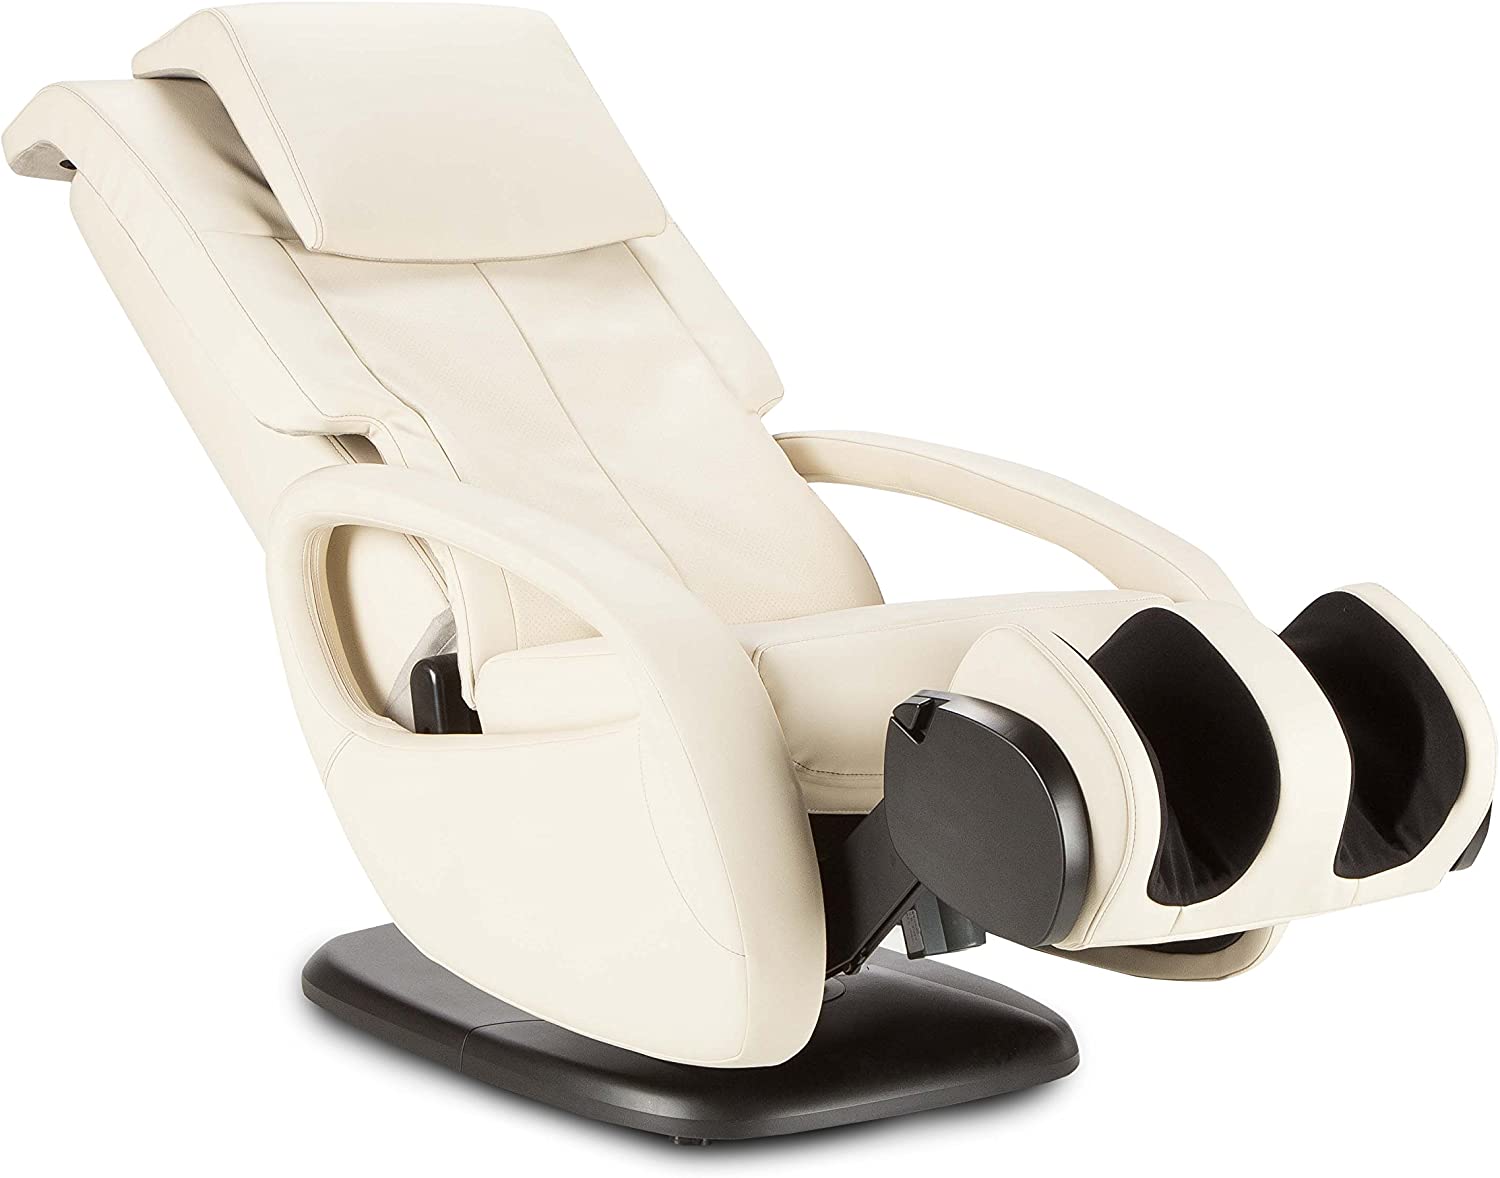 Human Touch Full-Body Upholstered Massage Chair